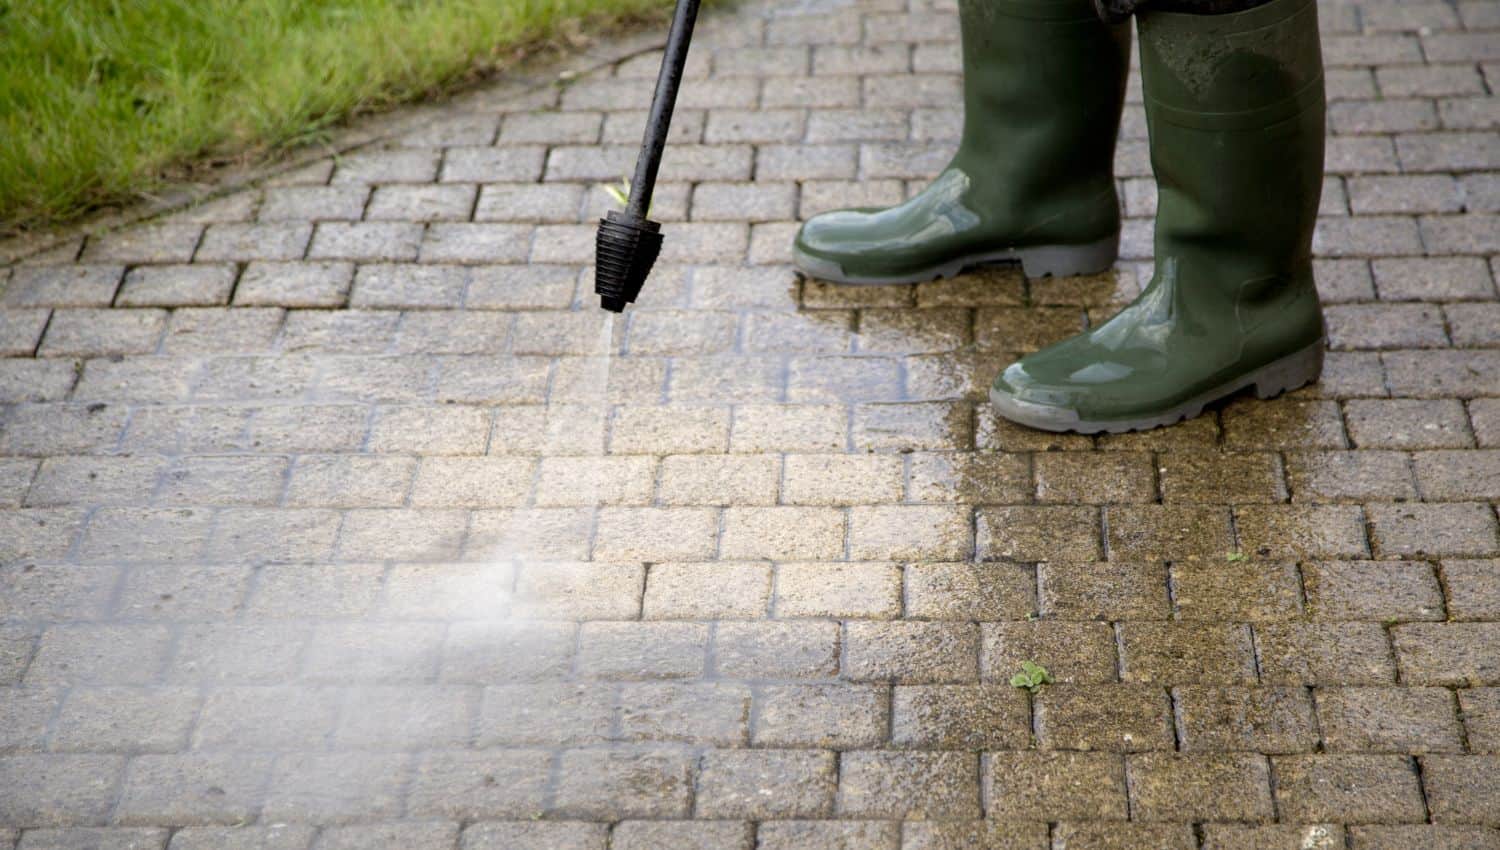 Cleaning and Maintaining Your Pavers